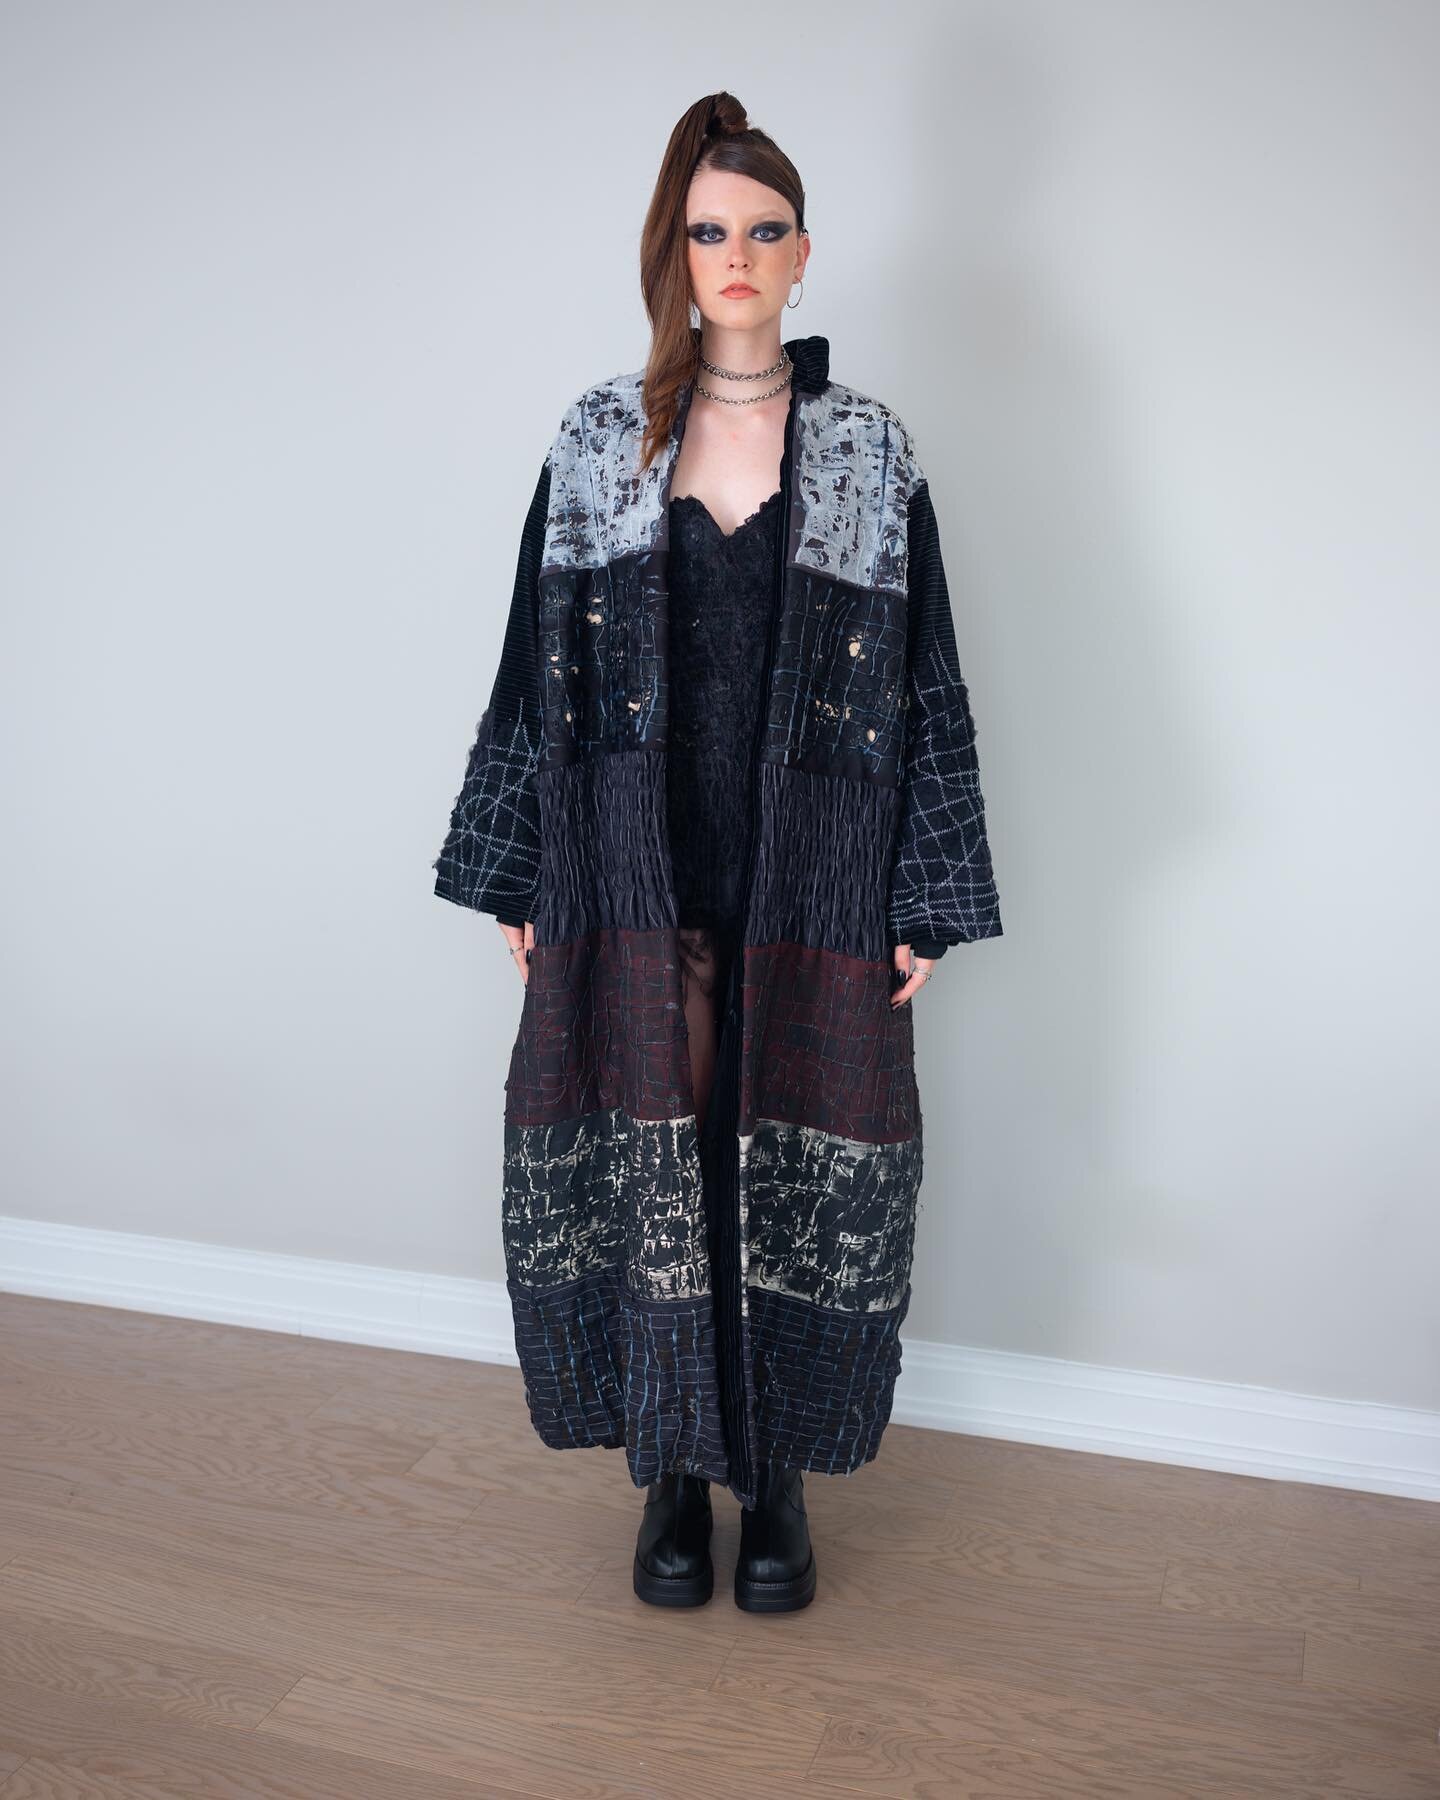 METAMORPHOSIS LOOK ONE : The first look is an oversized coat overtaking the wearer&mdash; how women feel when we are suffocated by what&rsquo;s expected of us. It is also made of textiles distorted and deconstructed using dryer sheets, a hot glue gun